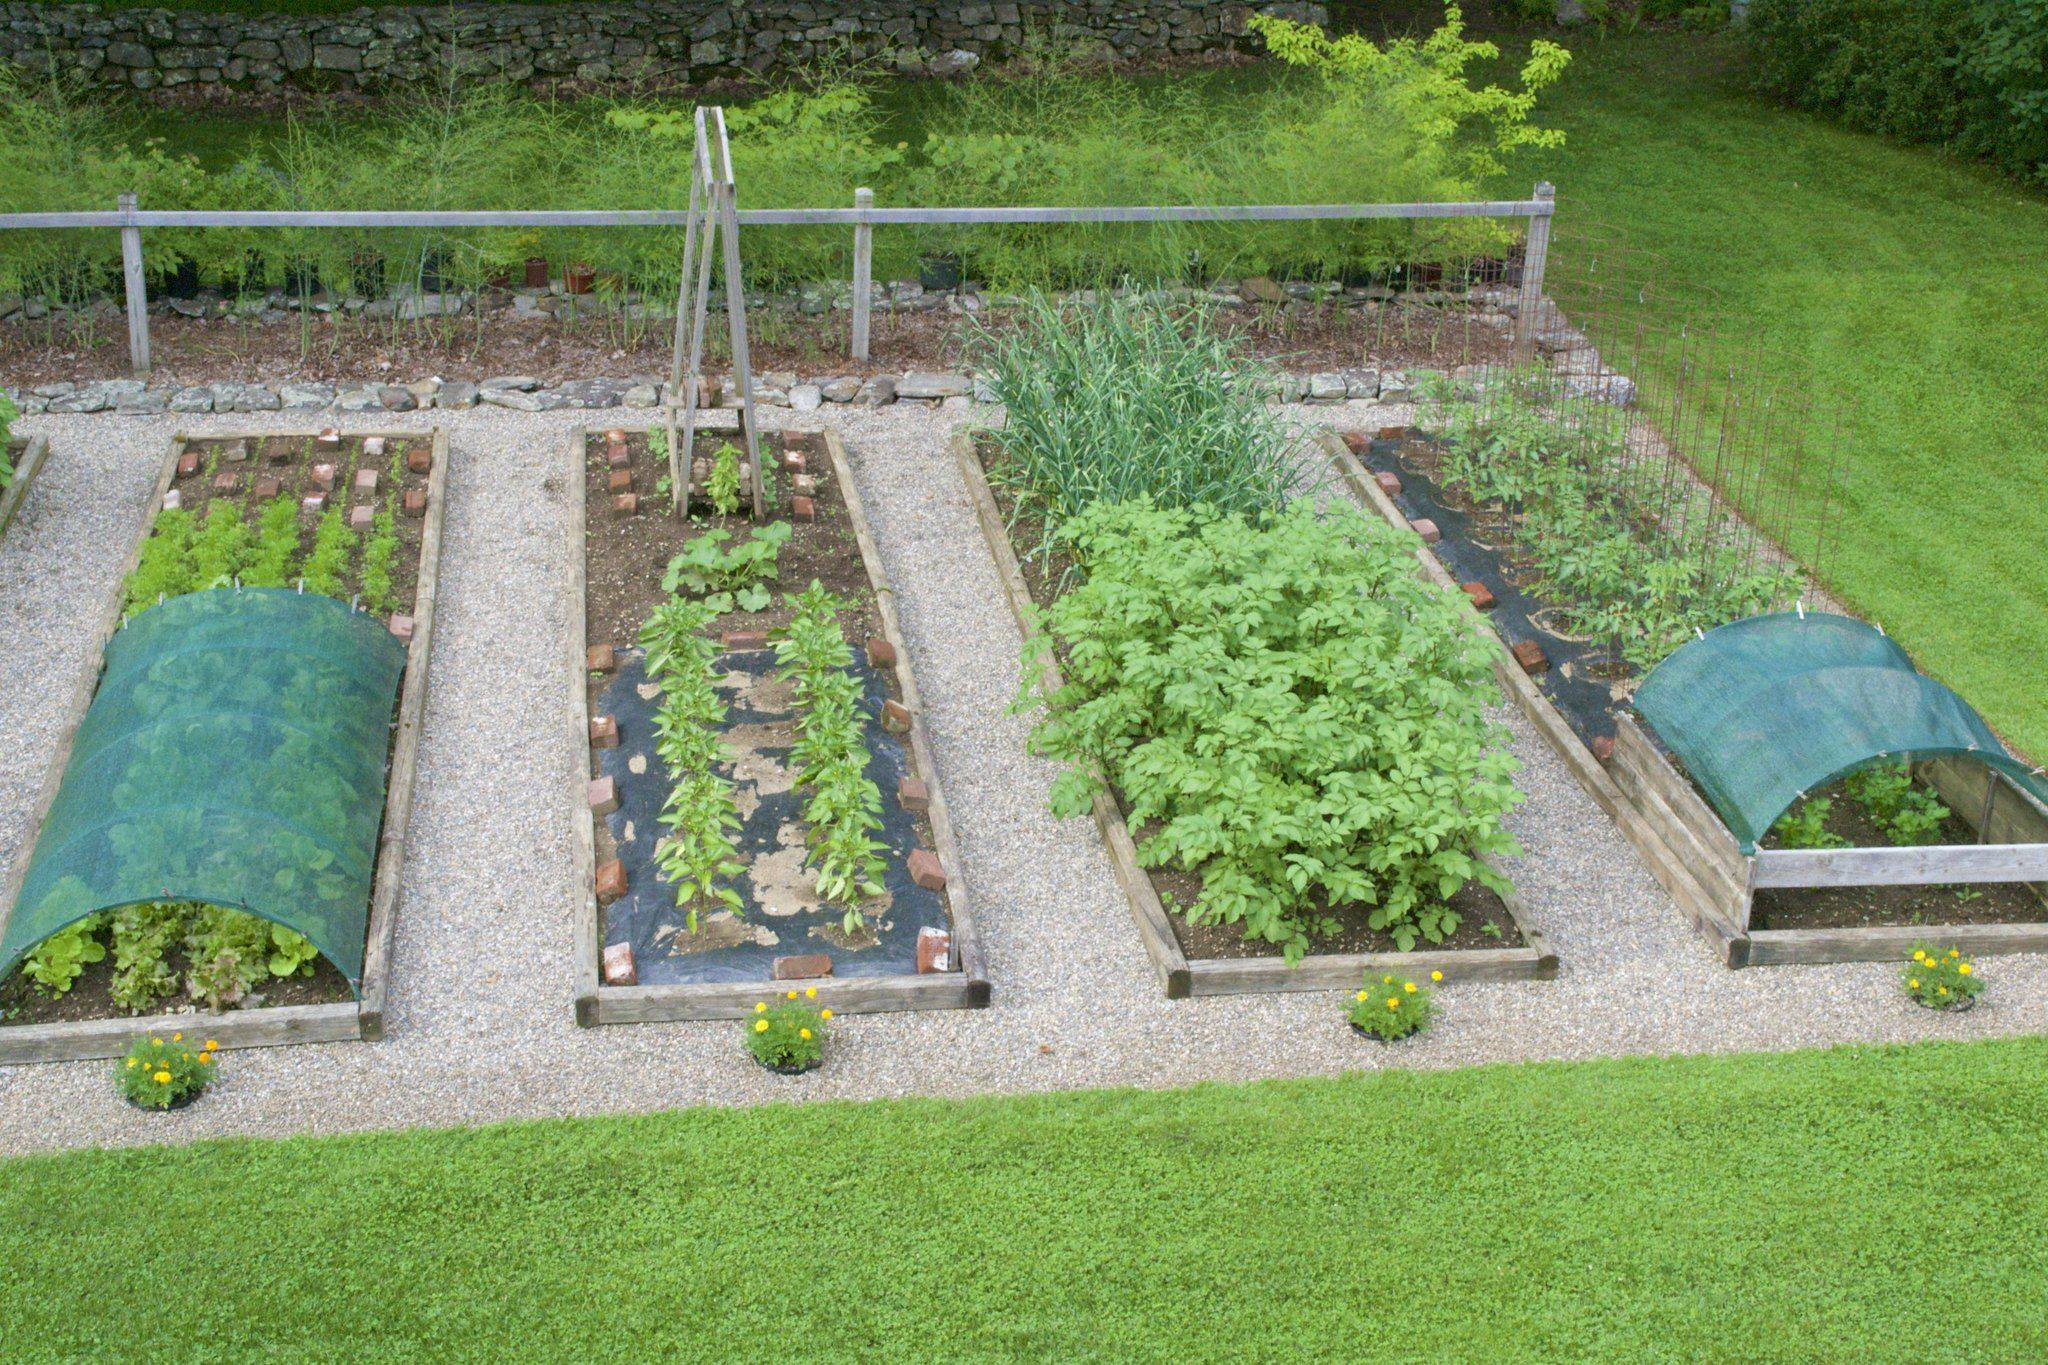 Awesome Diy Raised And Enclosed Garden Bed Ideas